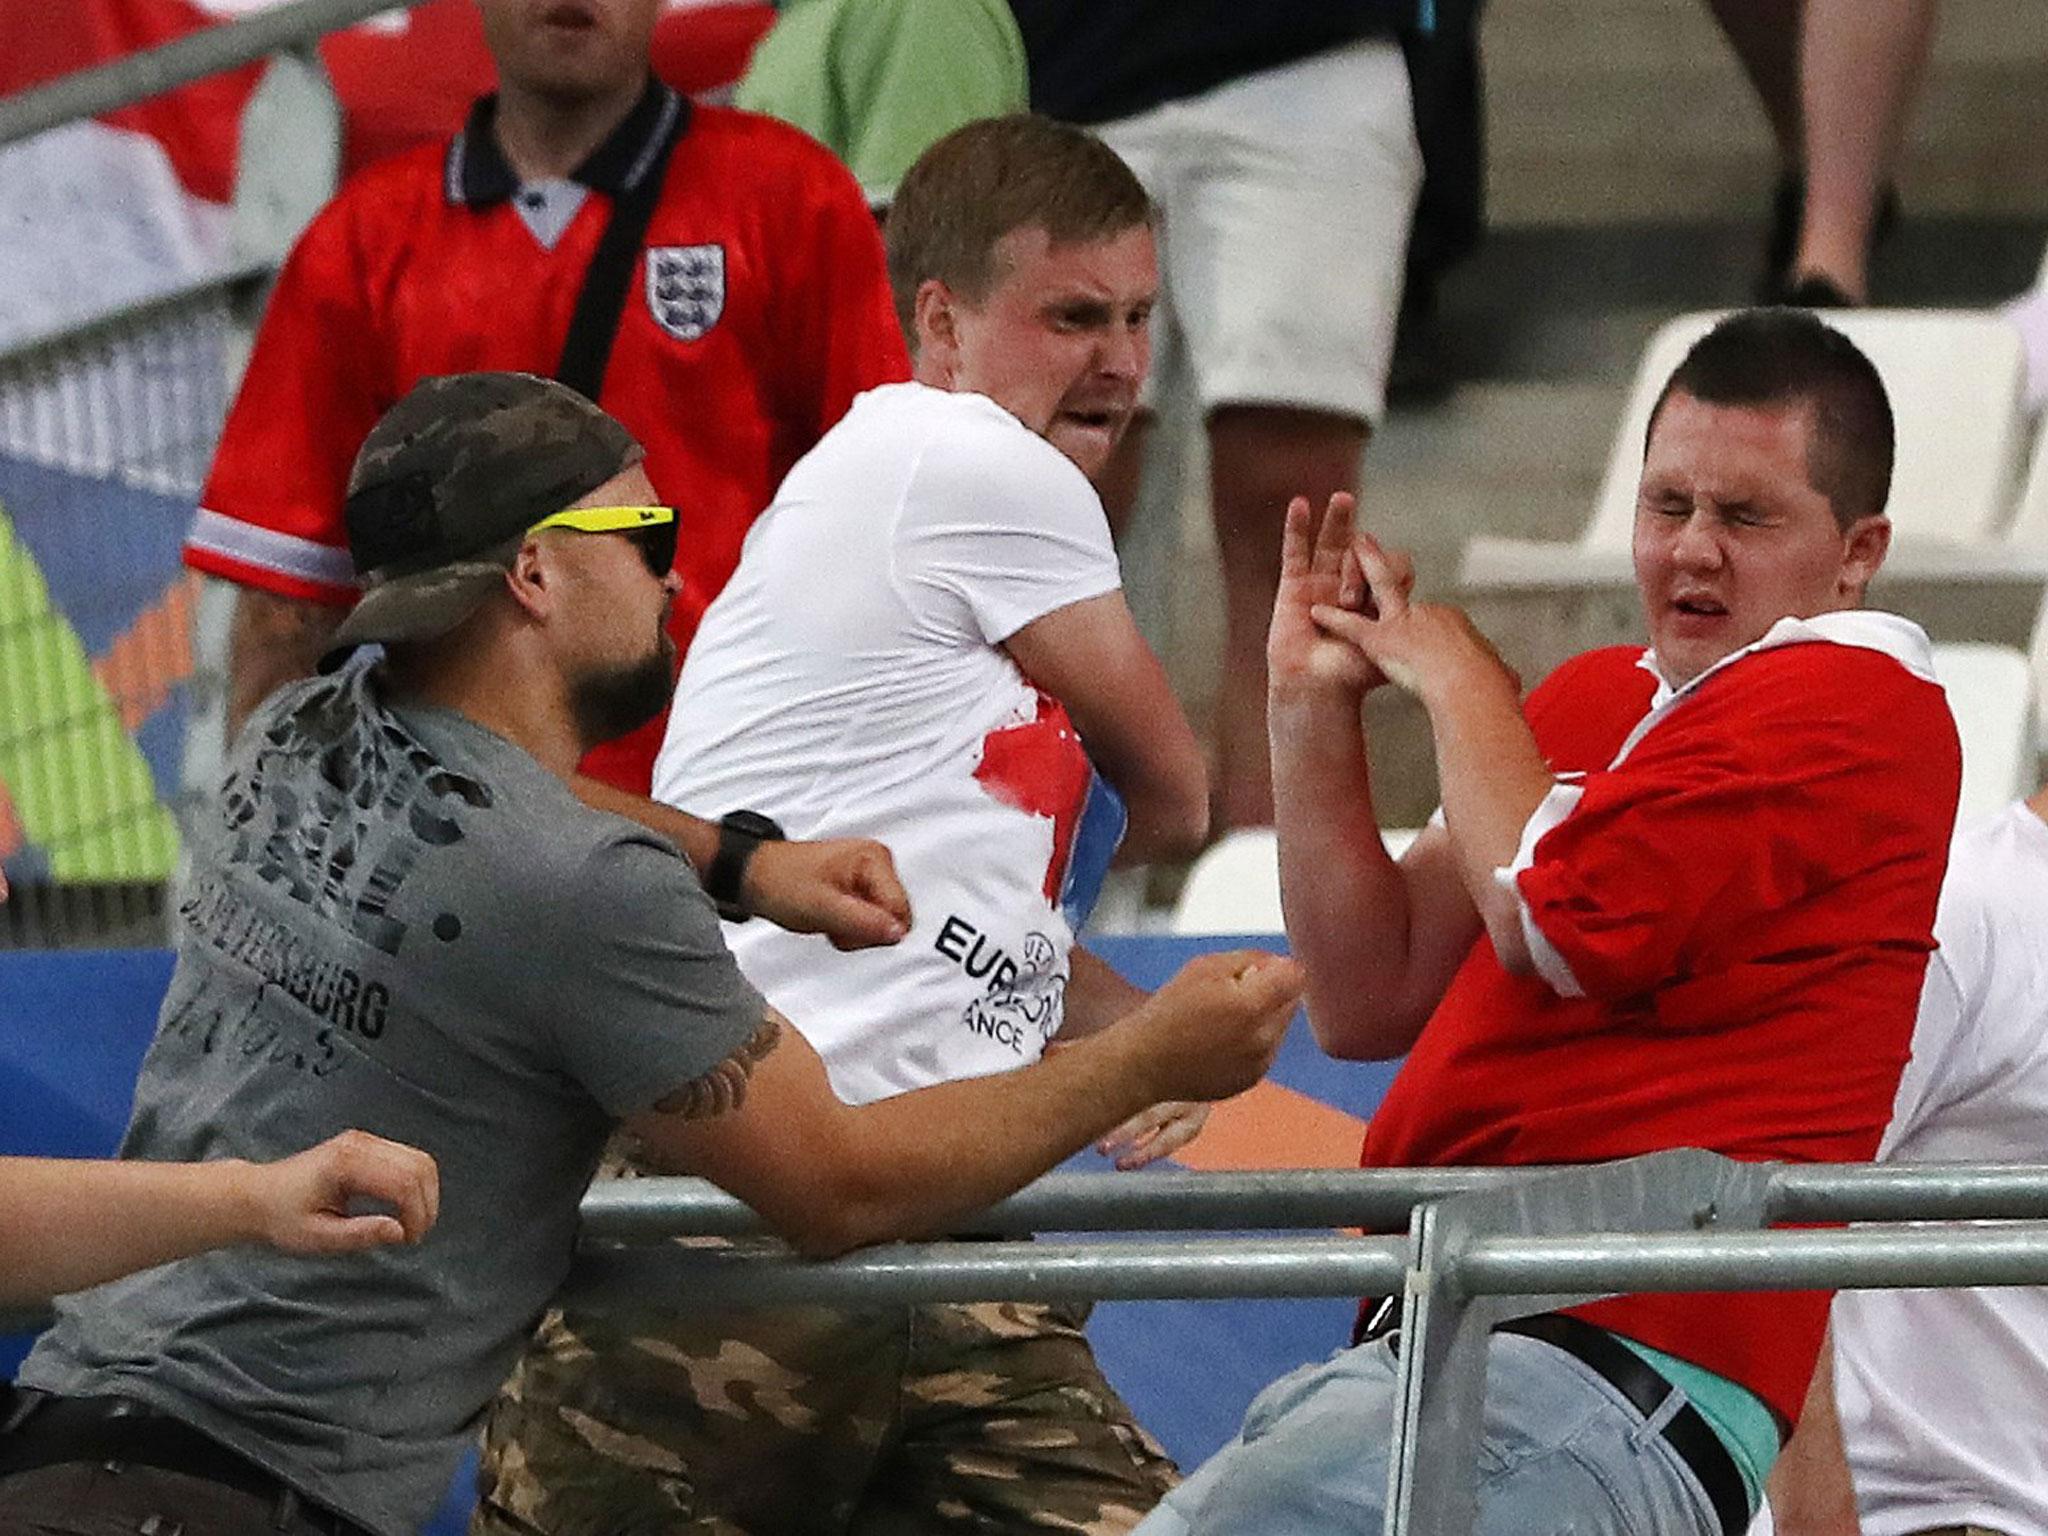 Russian supporters attack an England fan at the end of the Euro 2016 Group B match between England and Russia